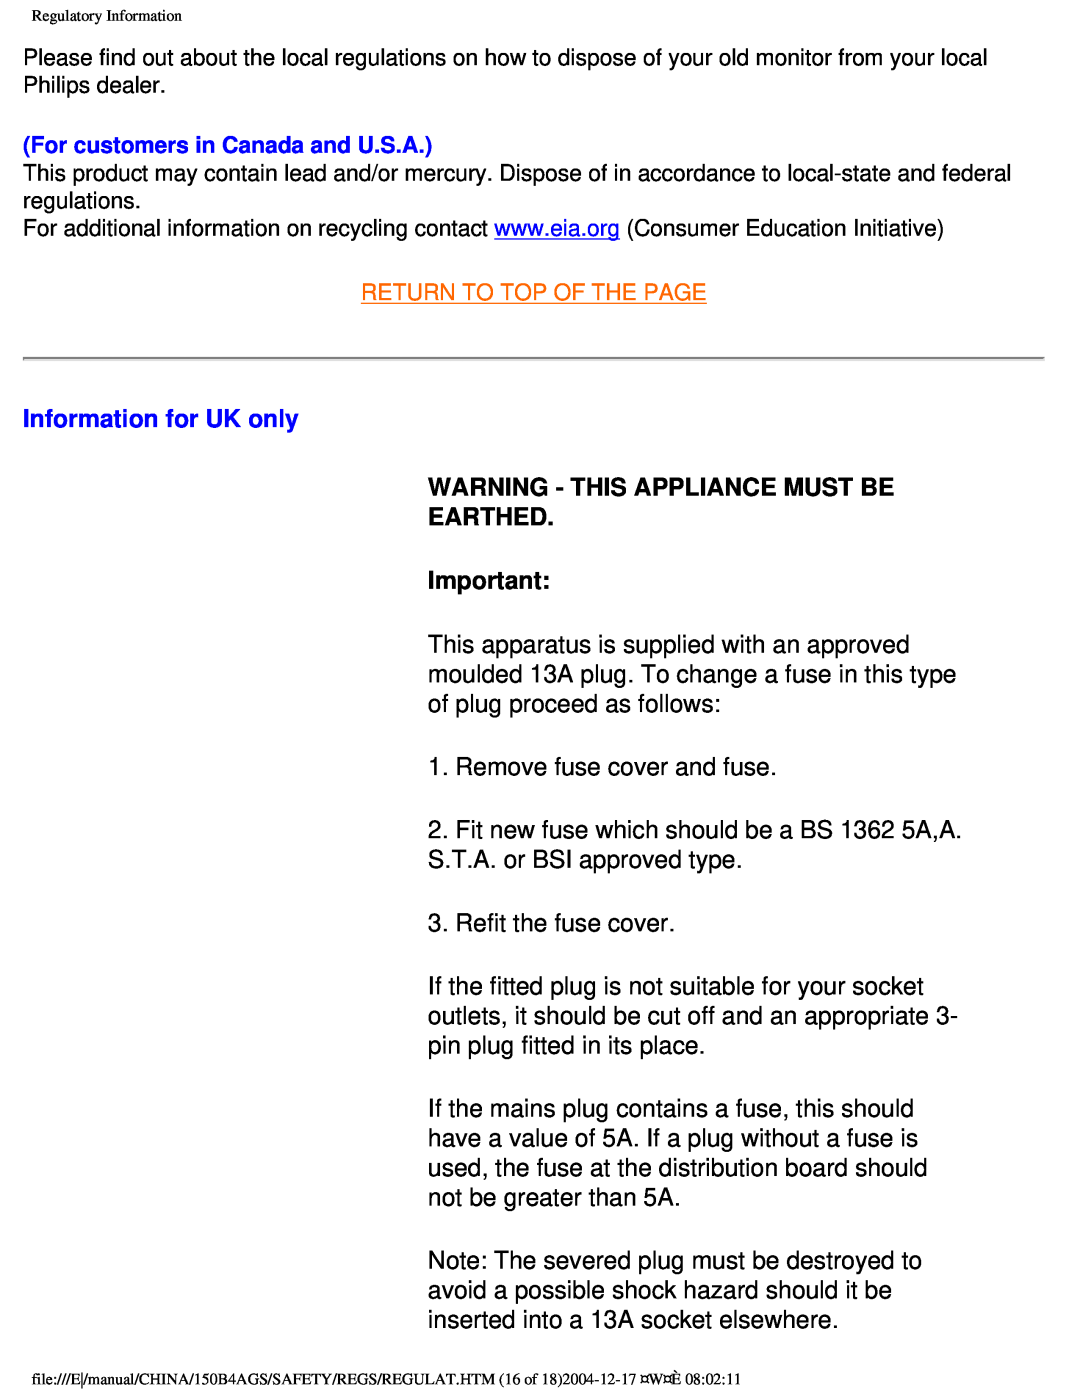 Philips 150B4AS, 150B4AG user manual Information for UK only, Warning - This Appliance Must Be Earthed 